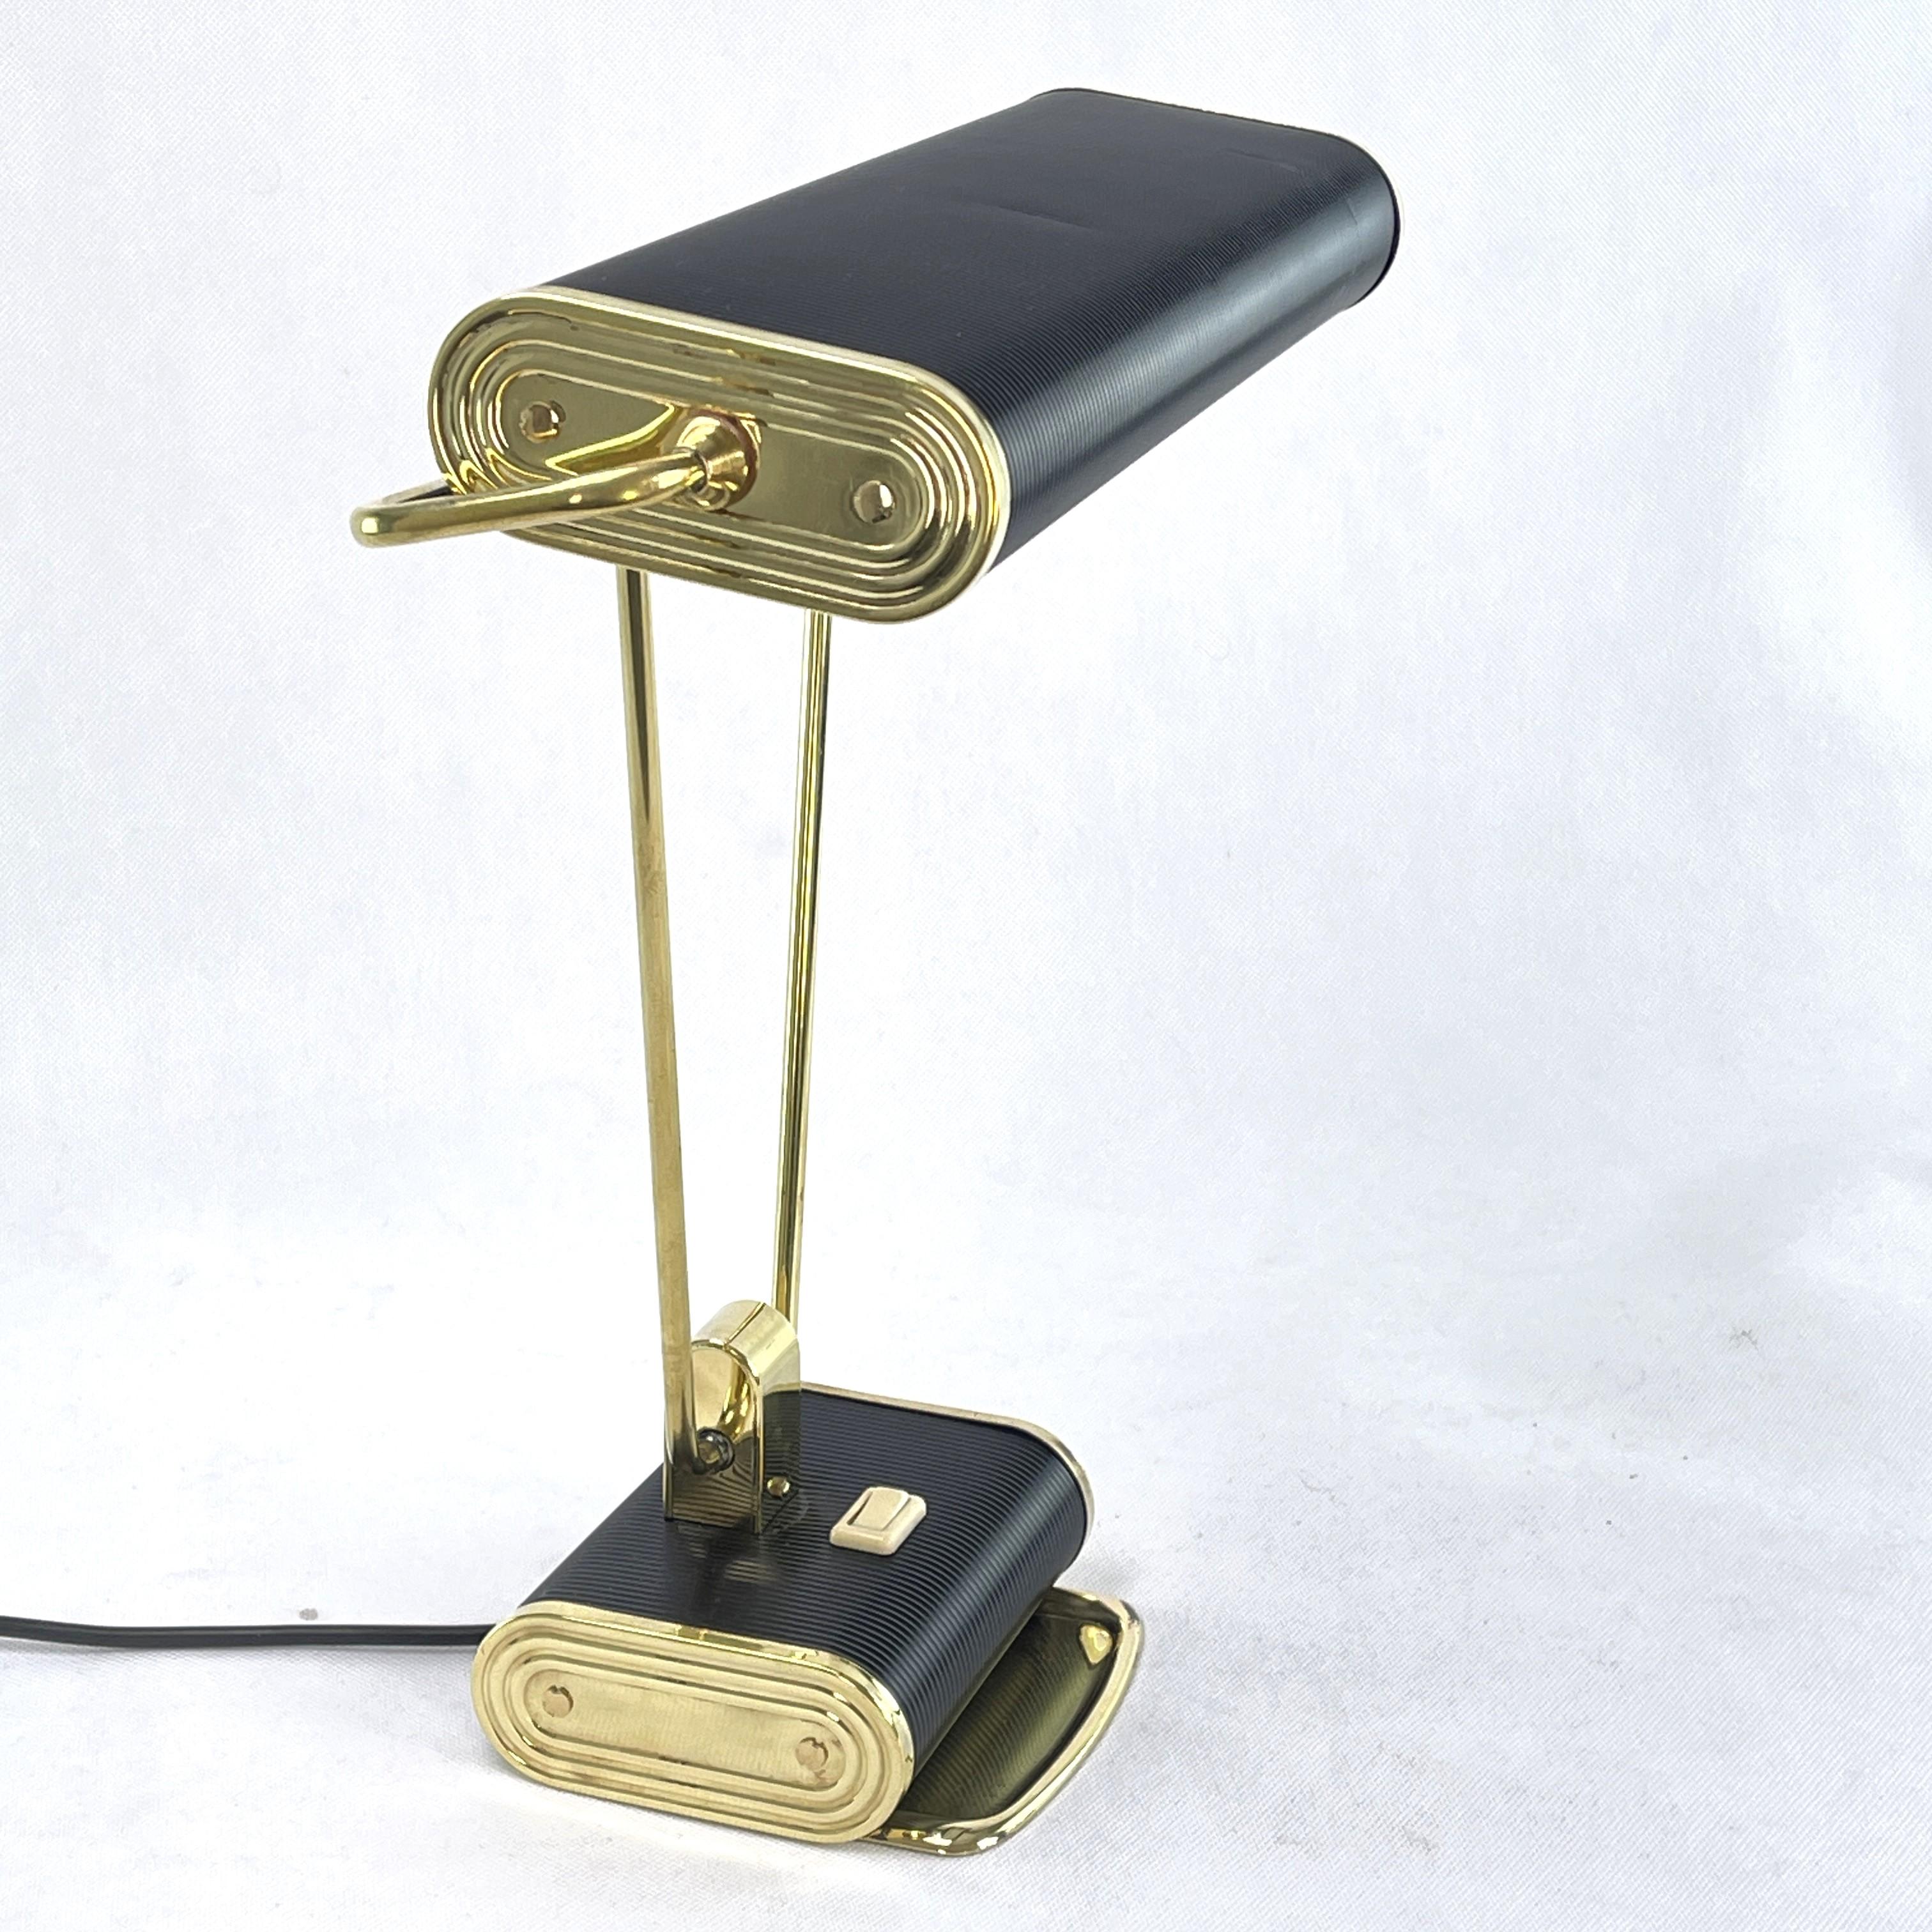 European Art Deco Table Lamp, Model N71, from Jumo, Eileen Gray, André Mounique